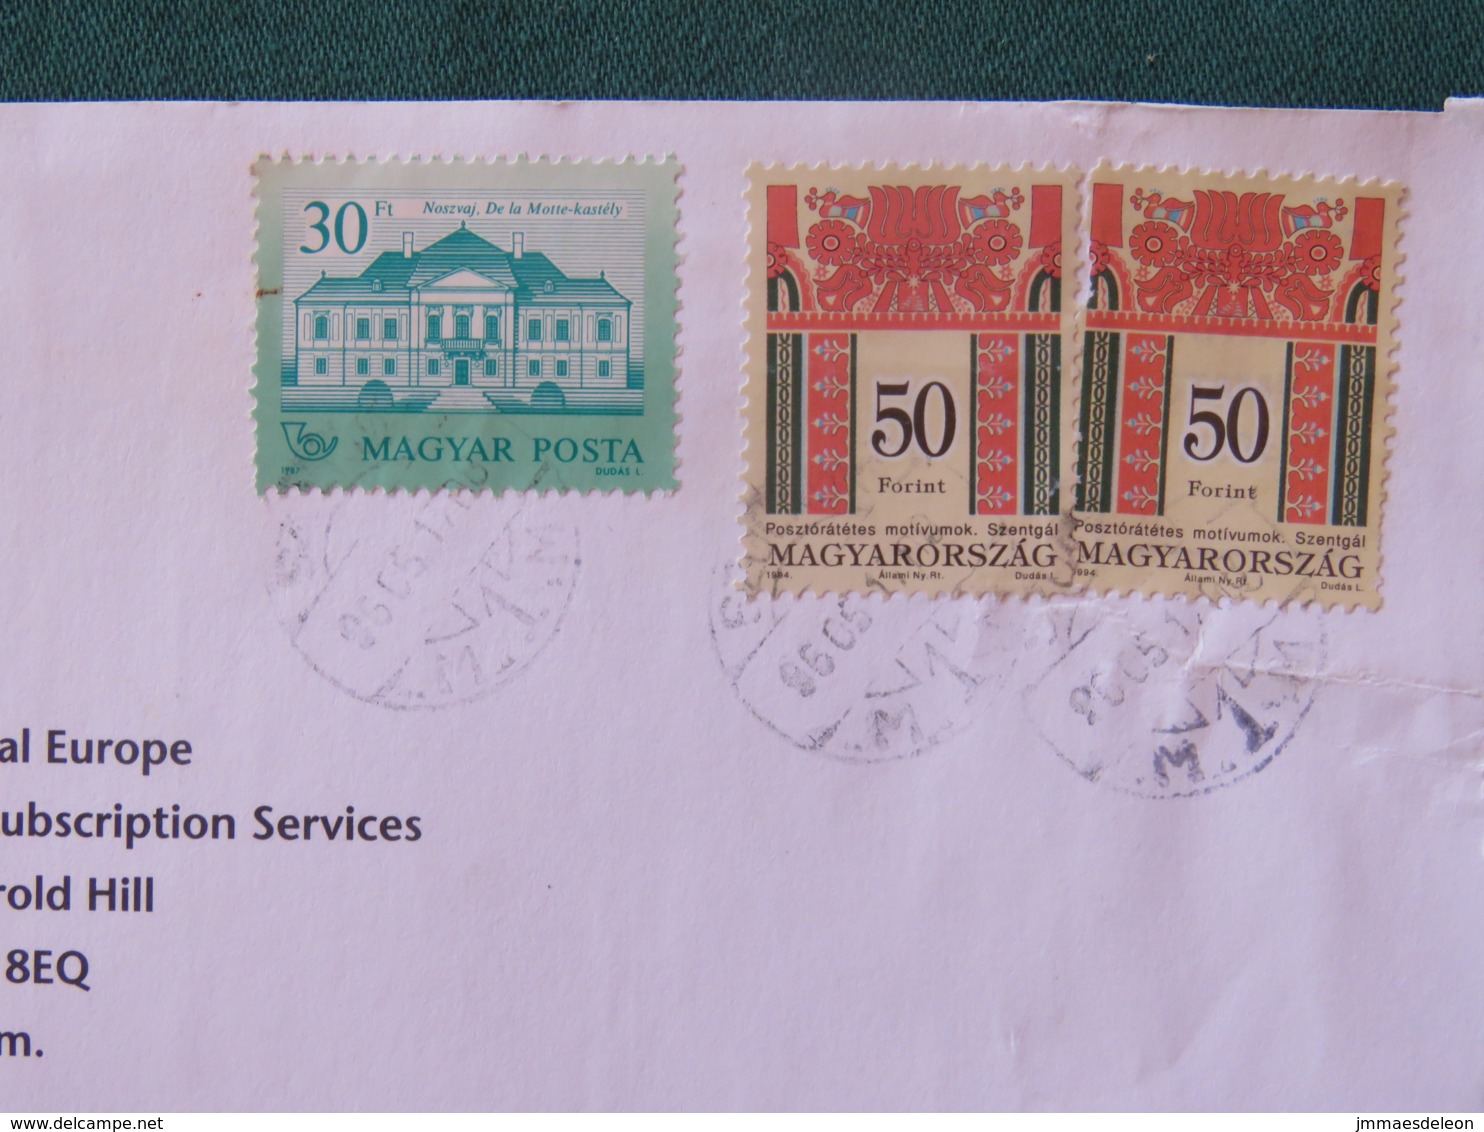 Hungary 2005 Cover To England - Castle - Covers & Documents